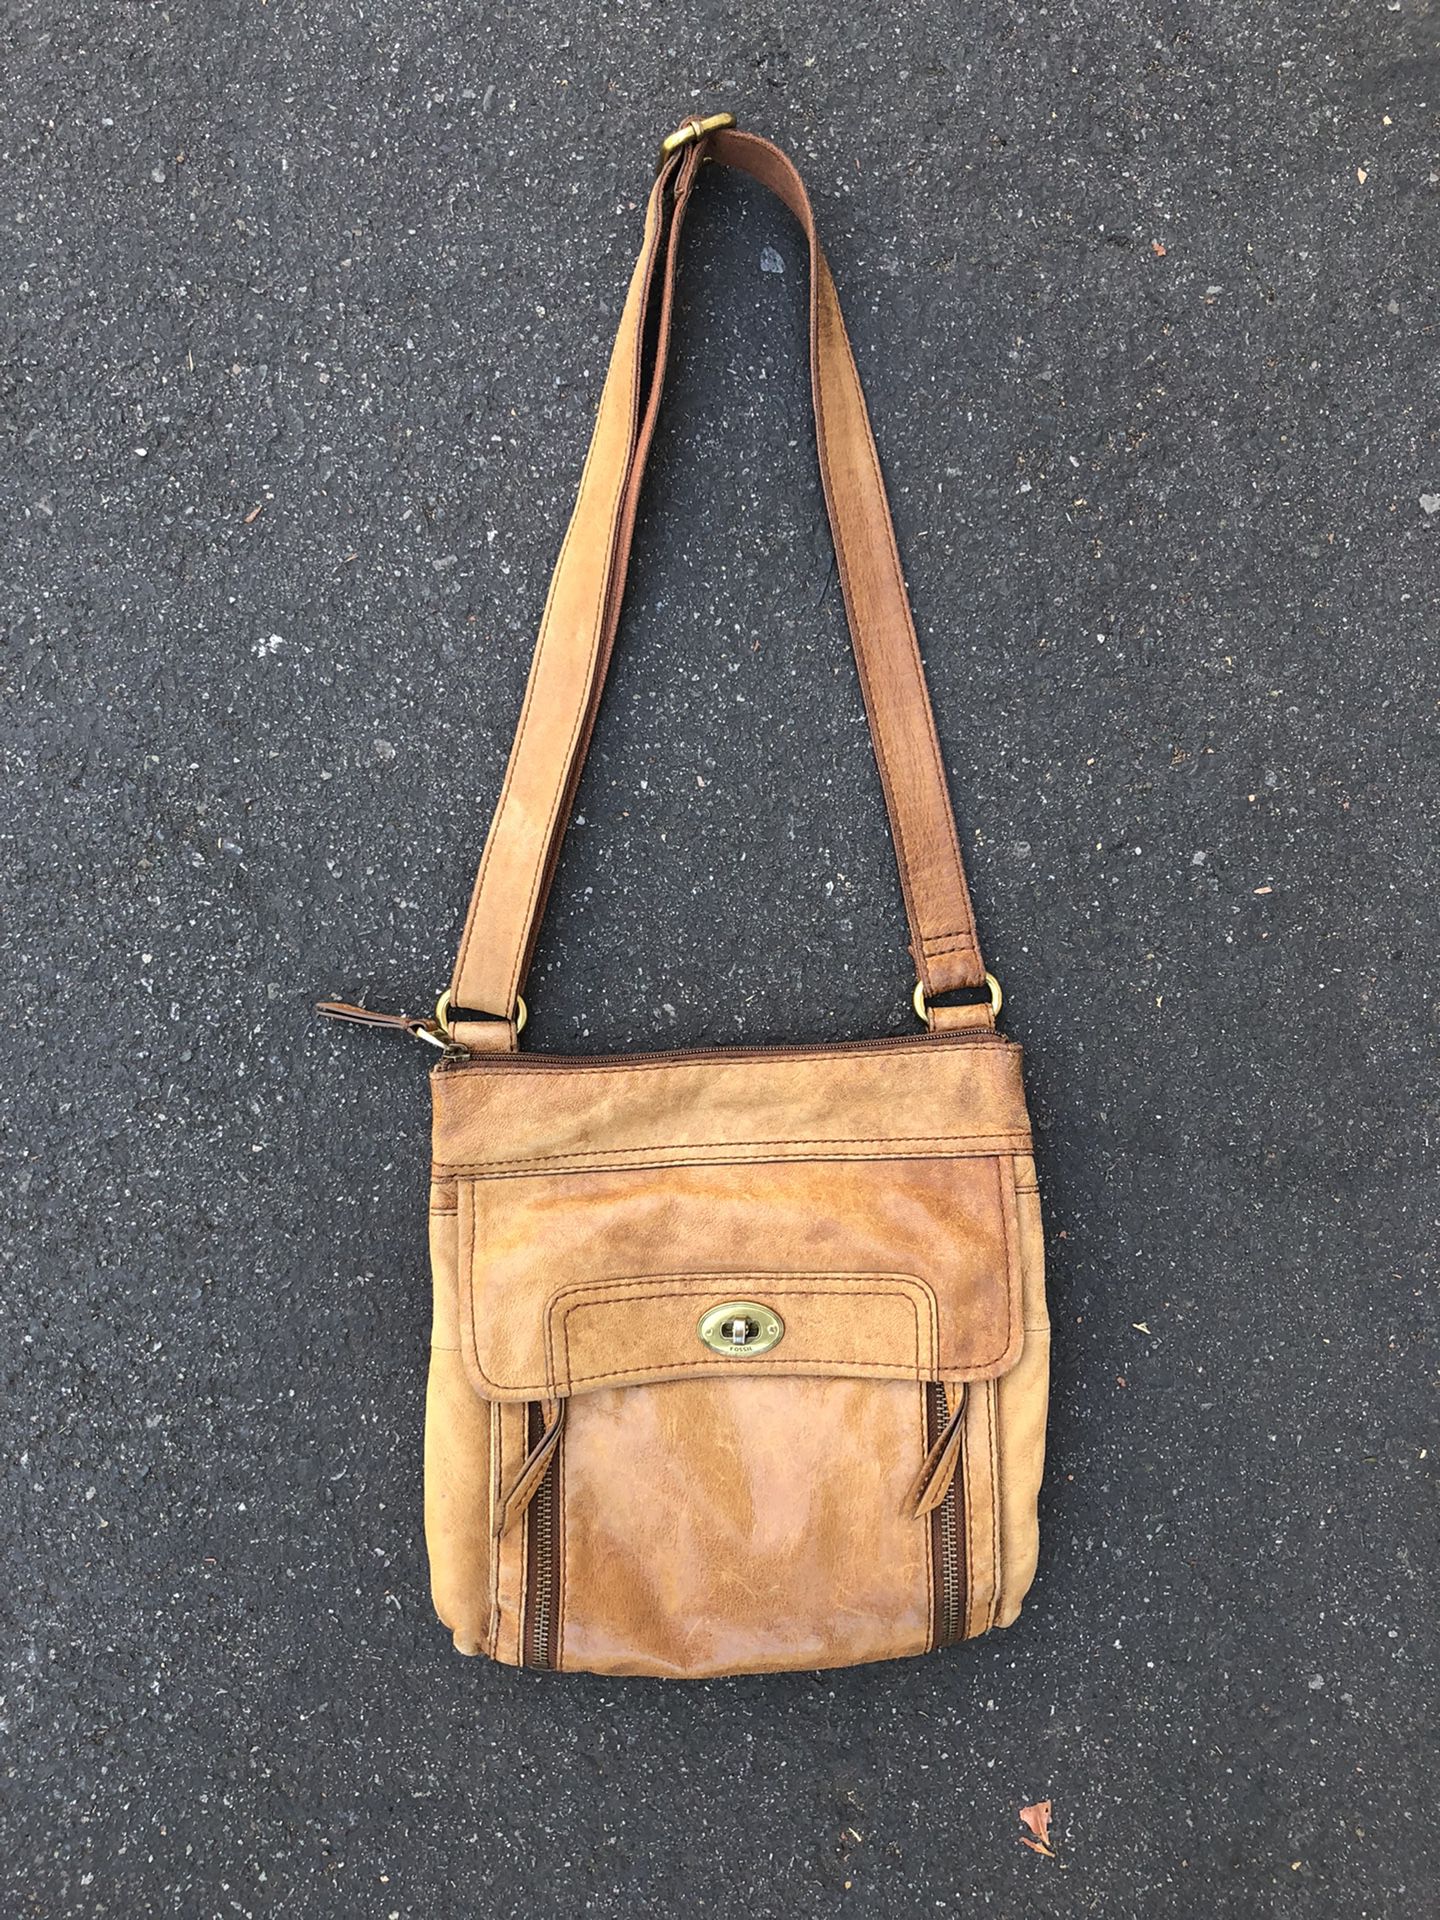 Vtg. Fossil Leather Purse